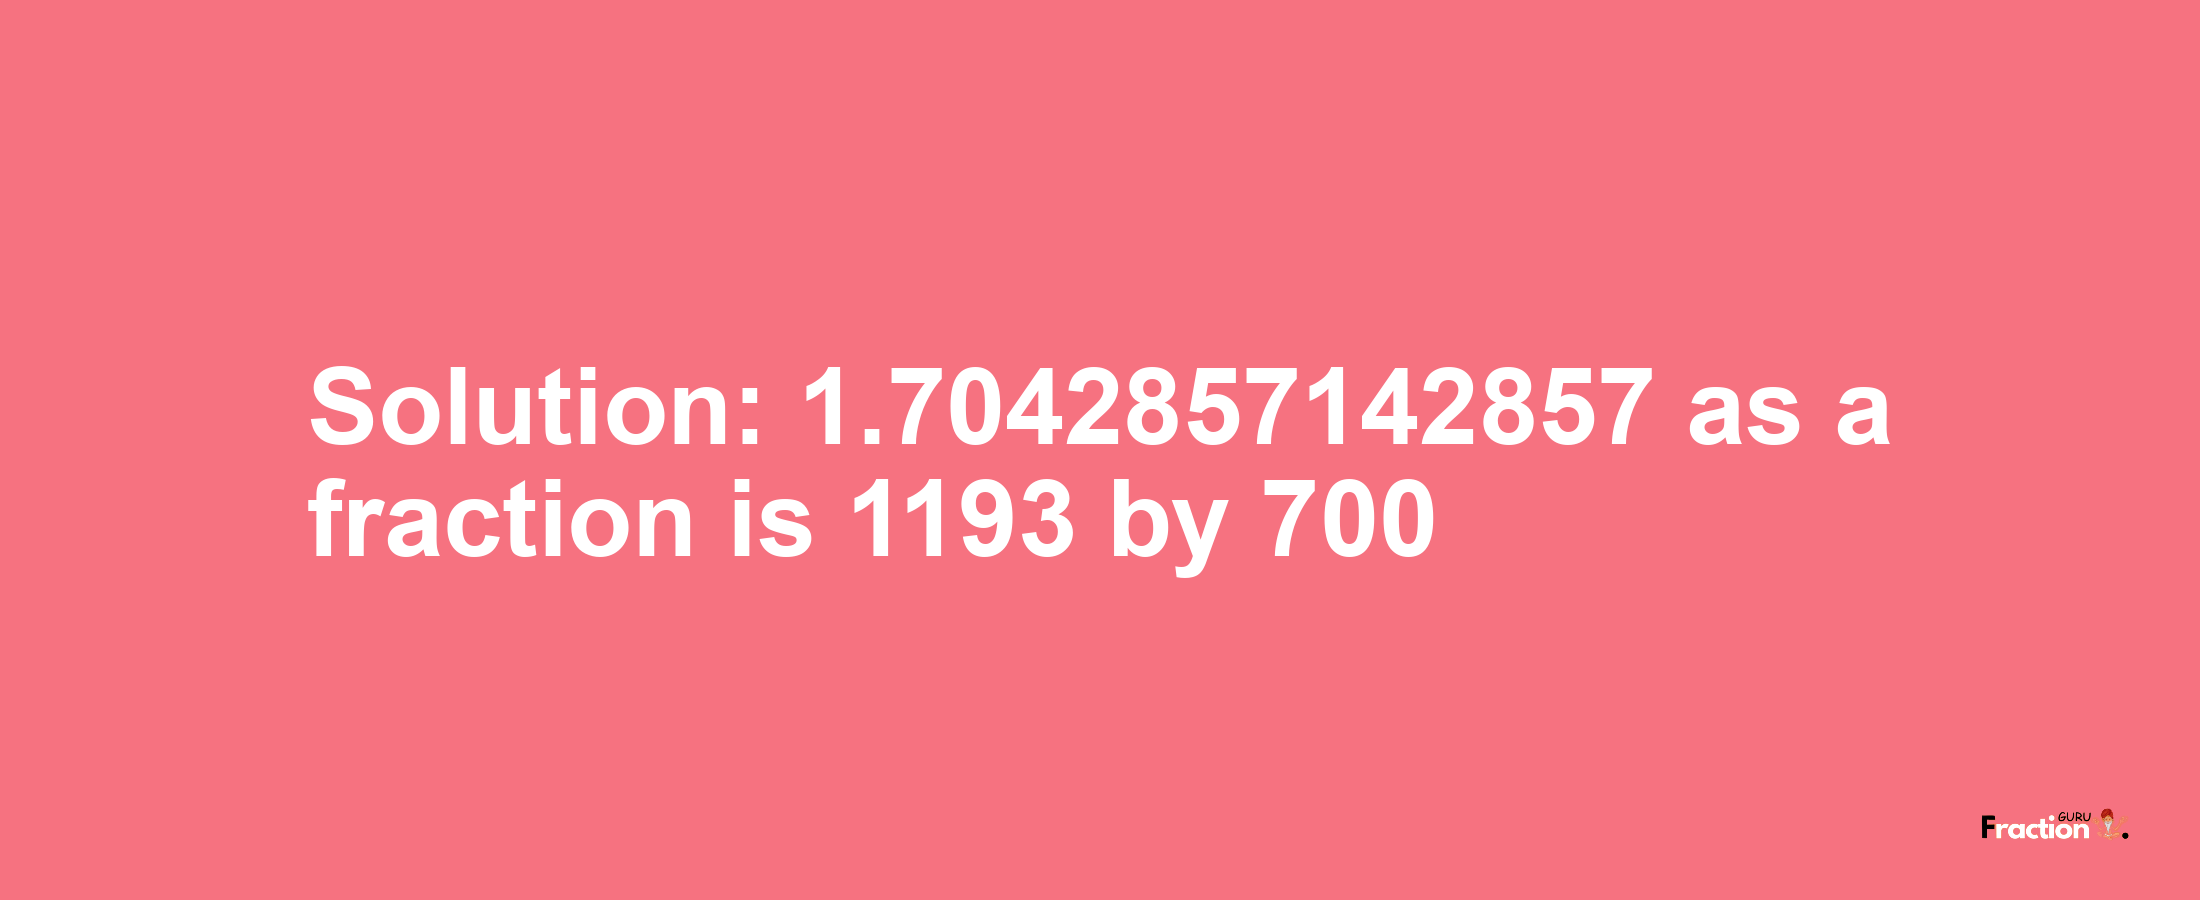 Solution:1.7042857142857 as a fraction is 1193/700